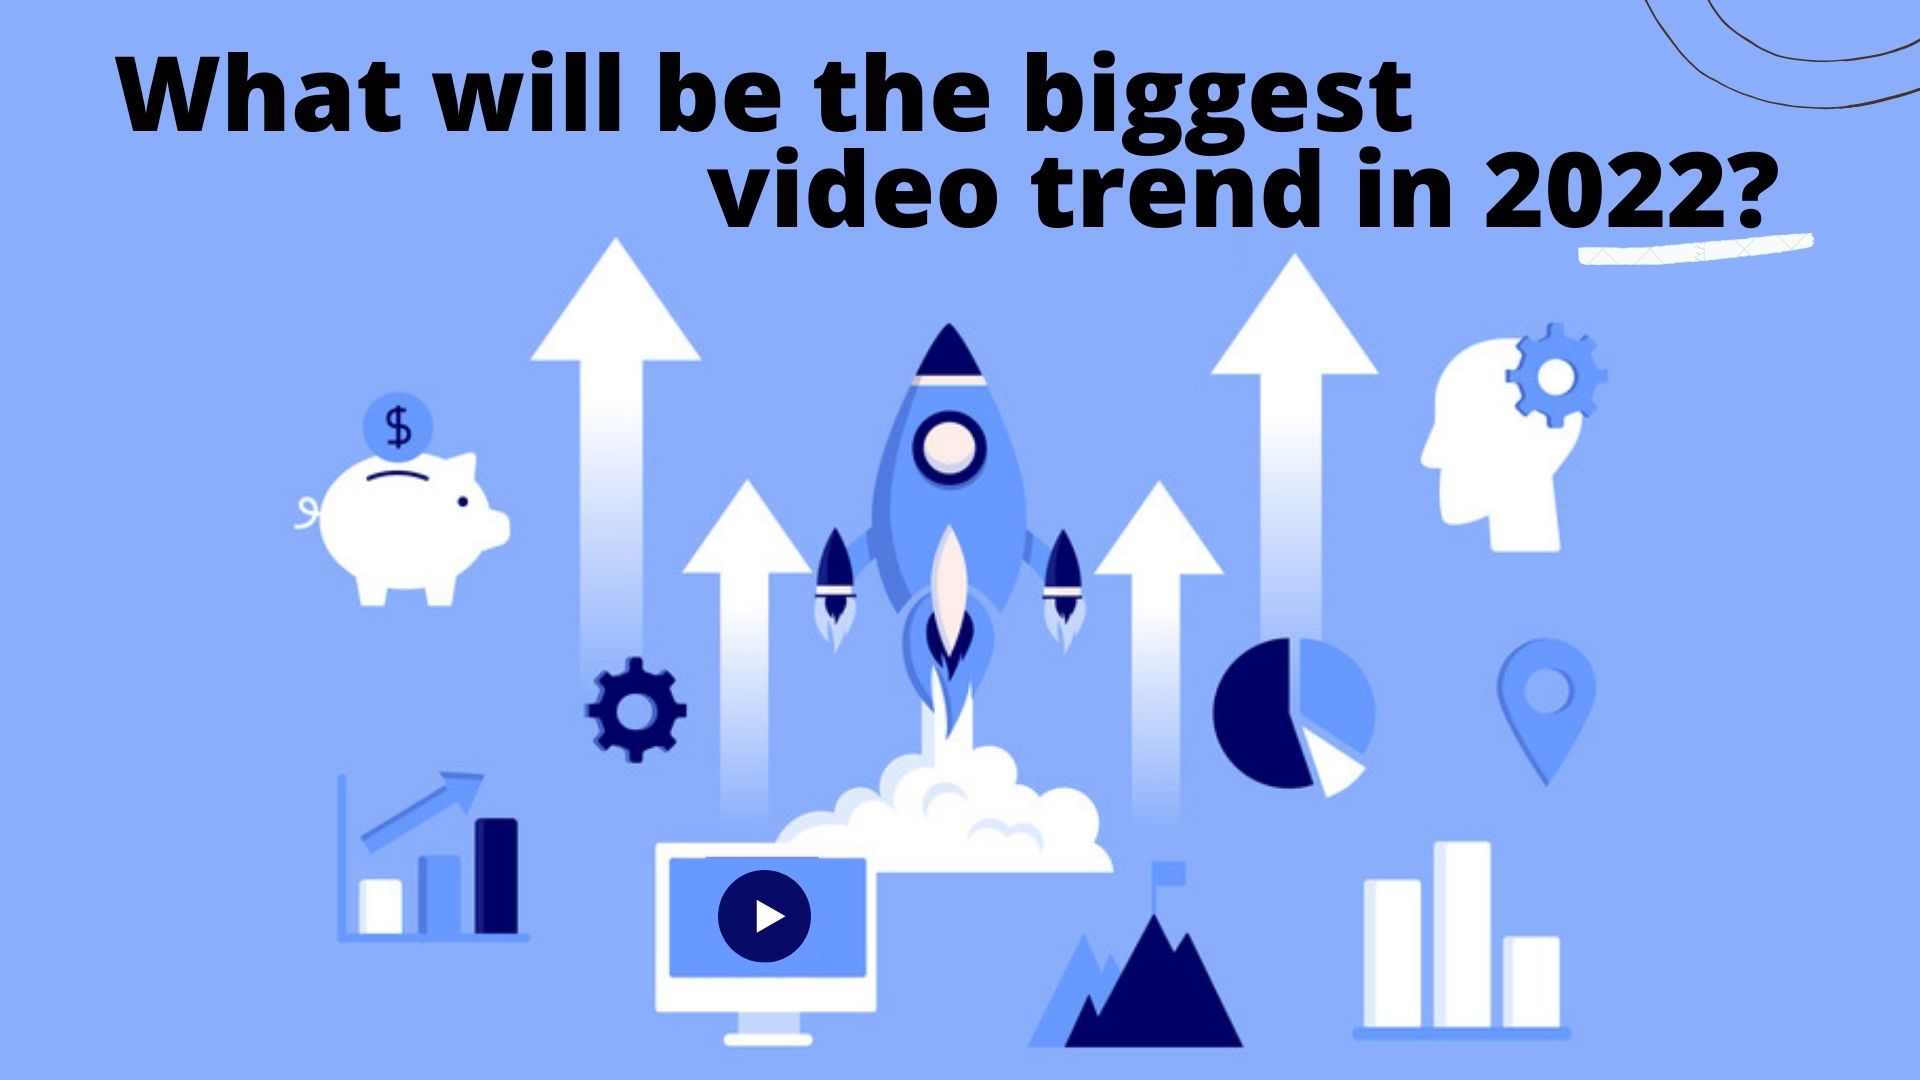 What will be the biggest video trend in 2022